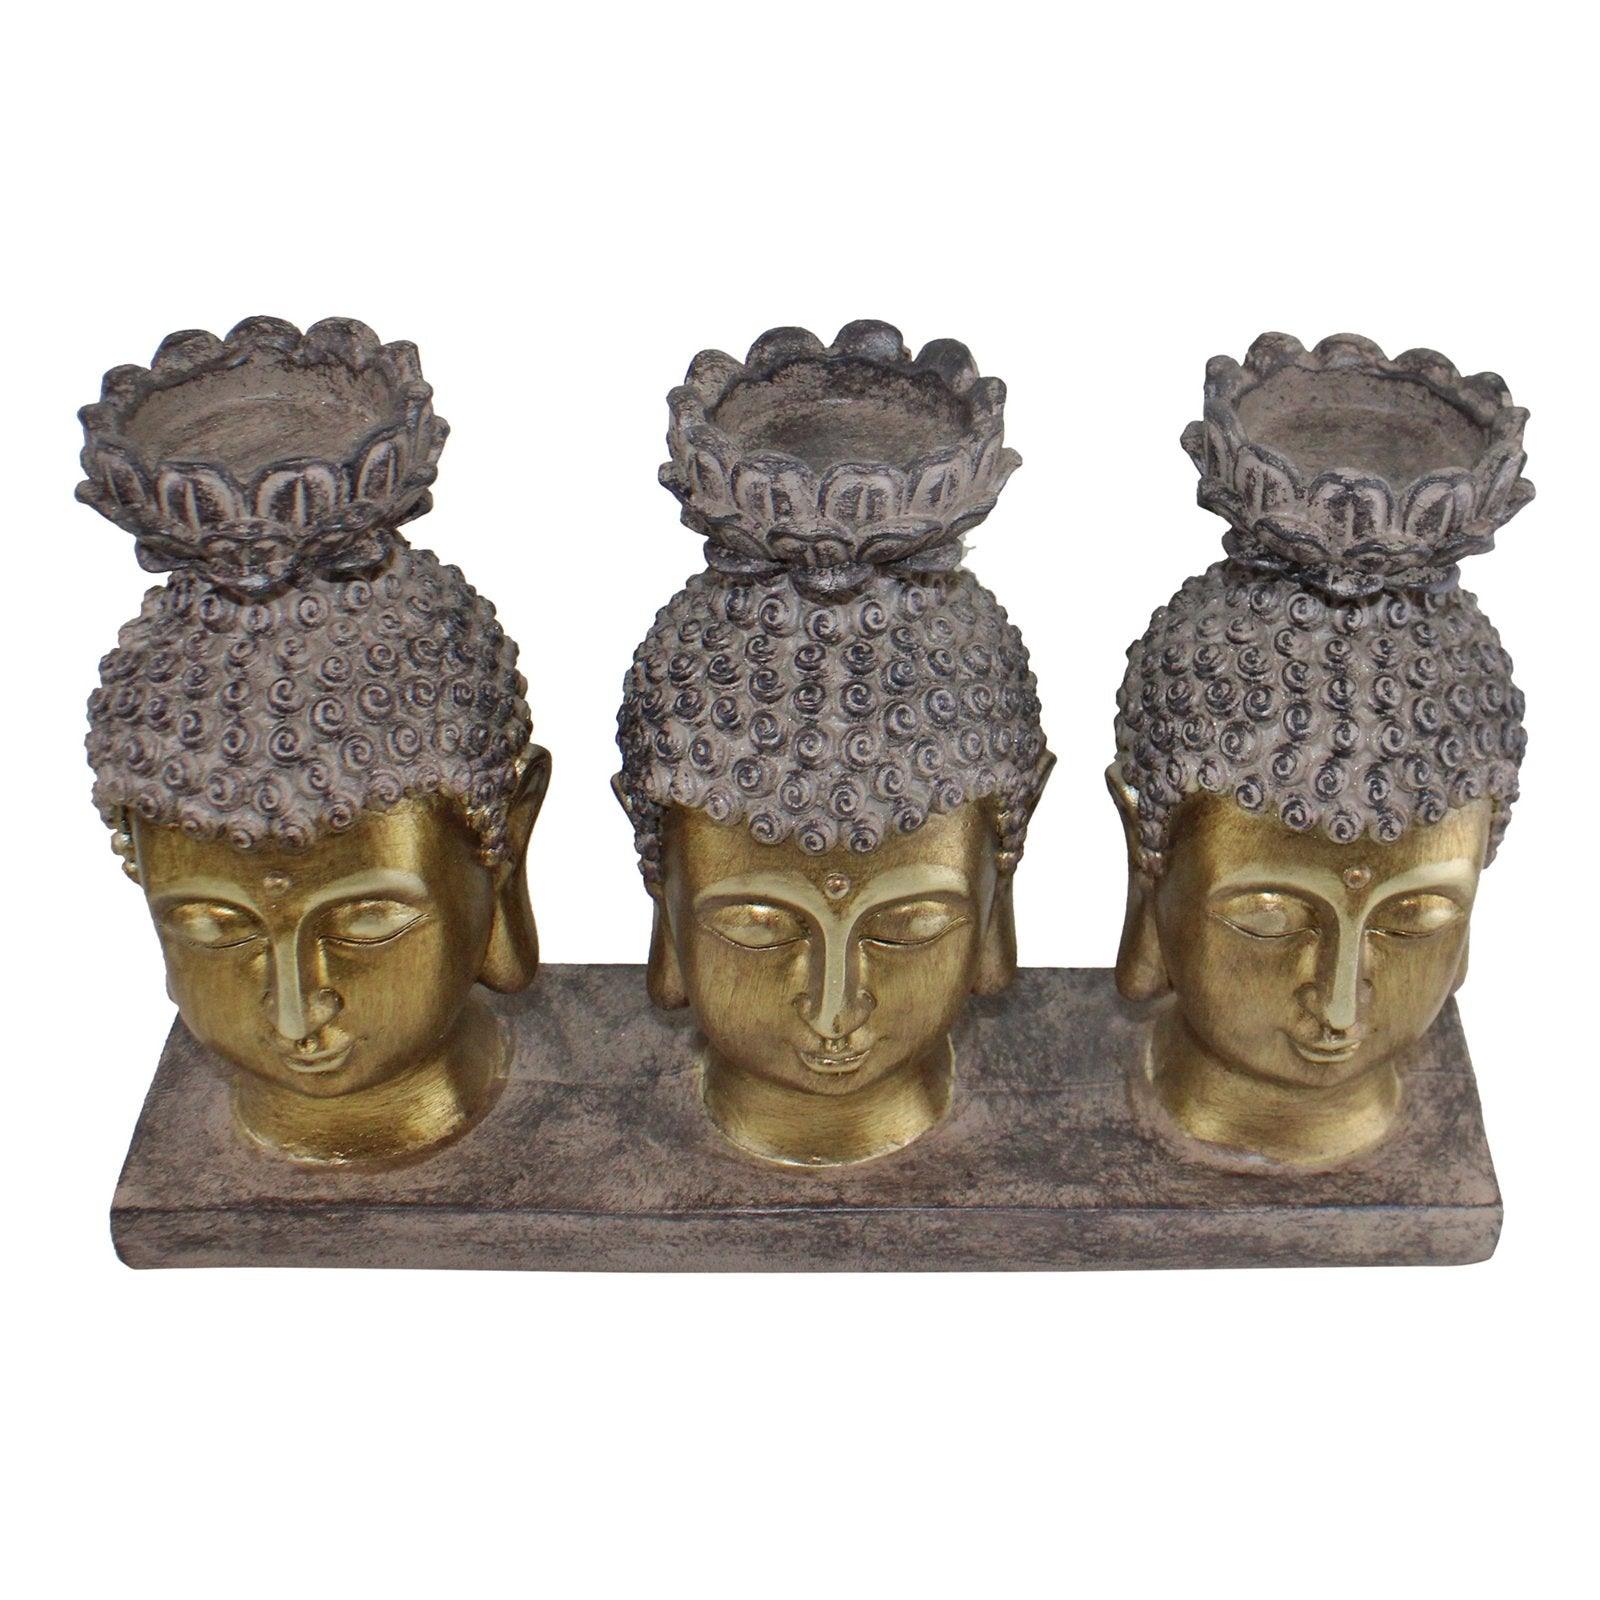 View Triple Candle Holder Buddha Design information